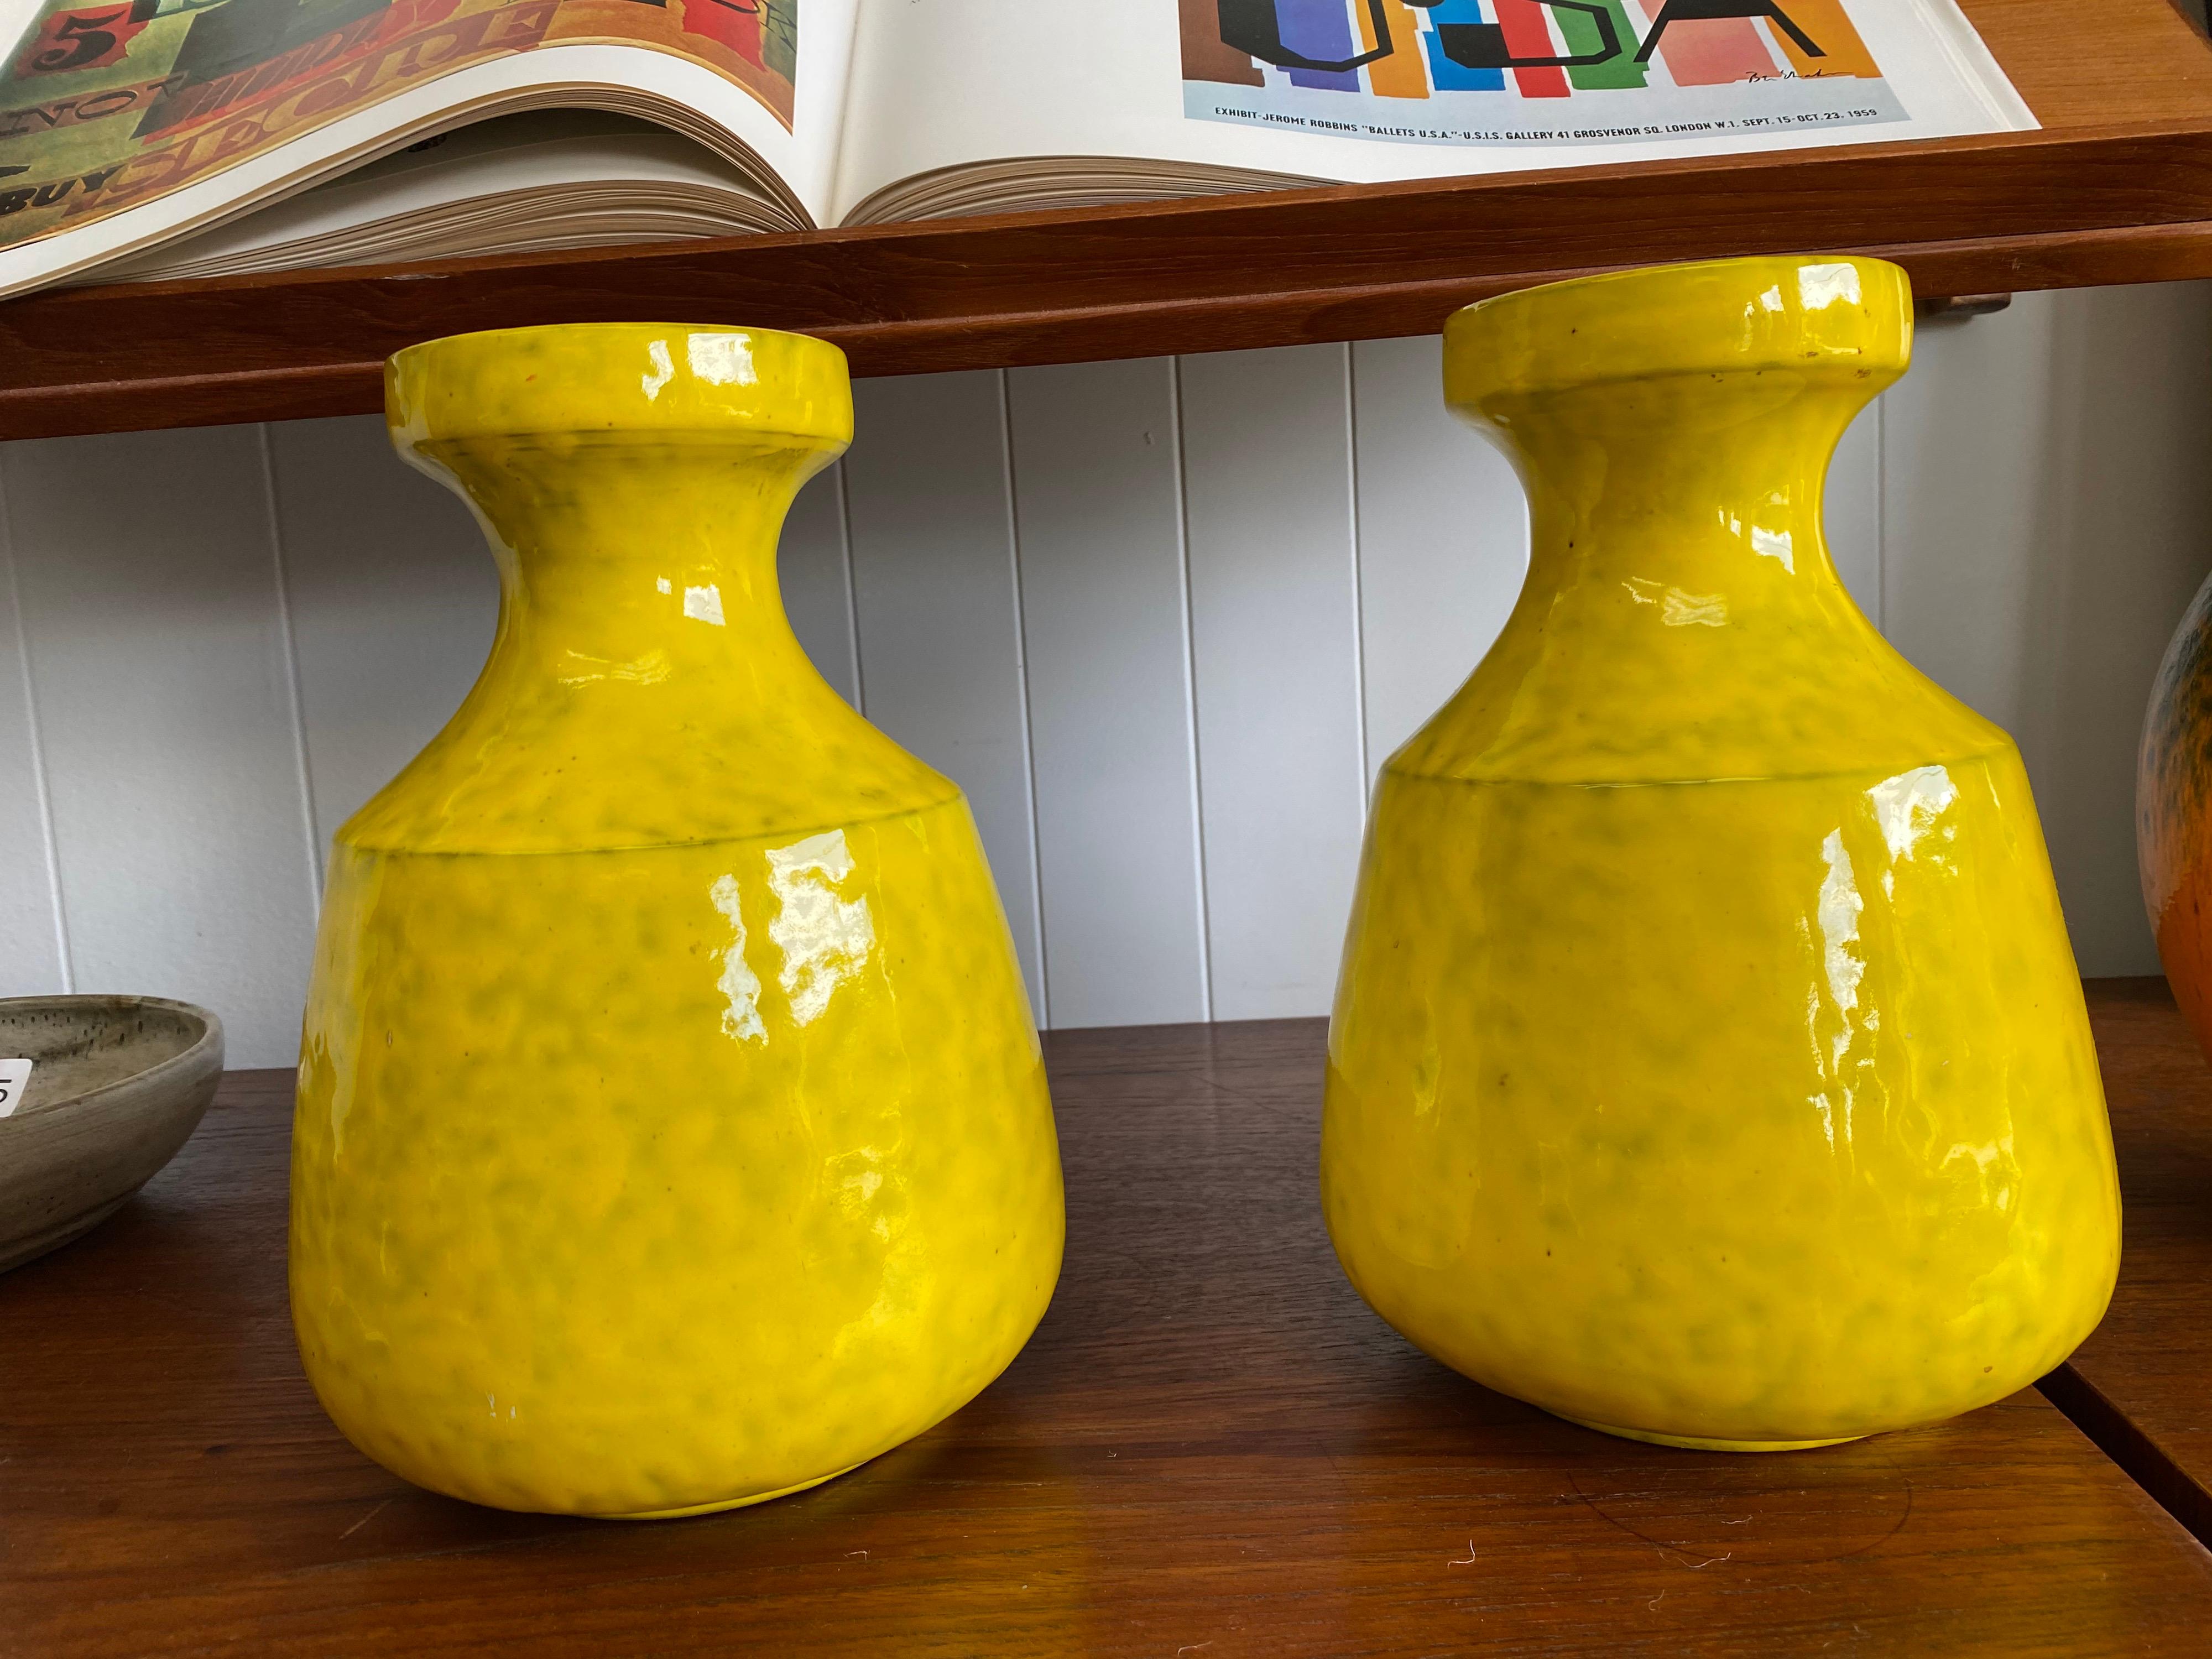 A set of Mid-Century Modern ceramic vases made in Italy by Rosenthal-Netter is signed with paper label. These vibrant yellow vases are in good condition.